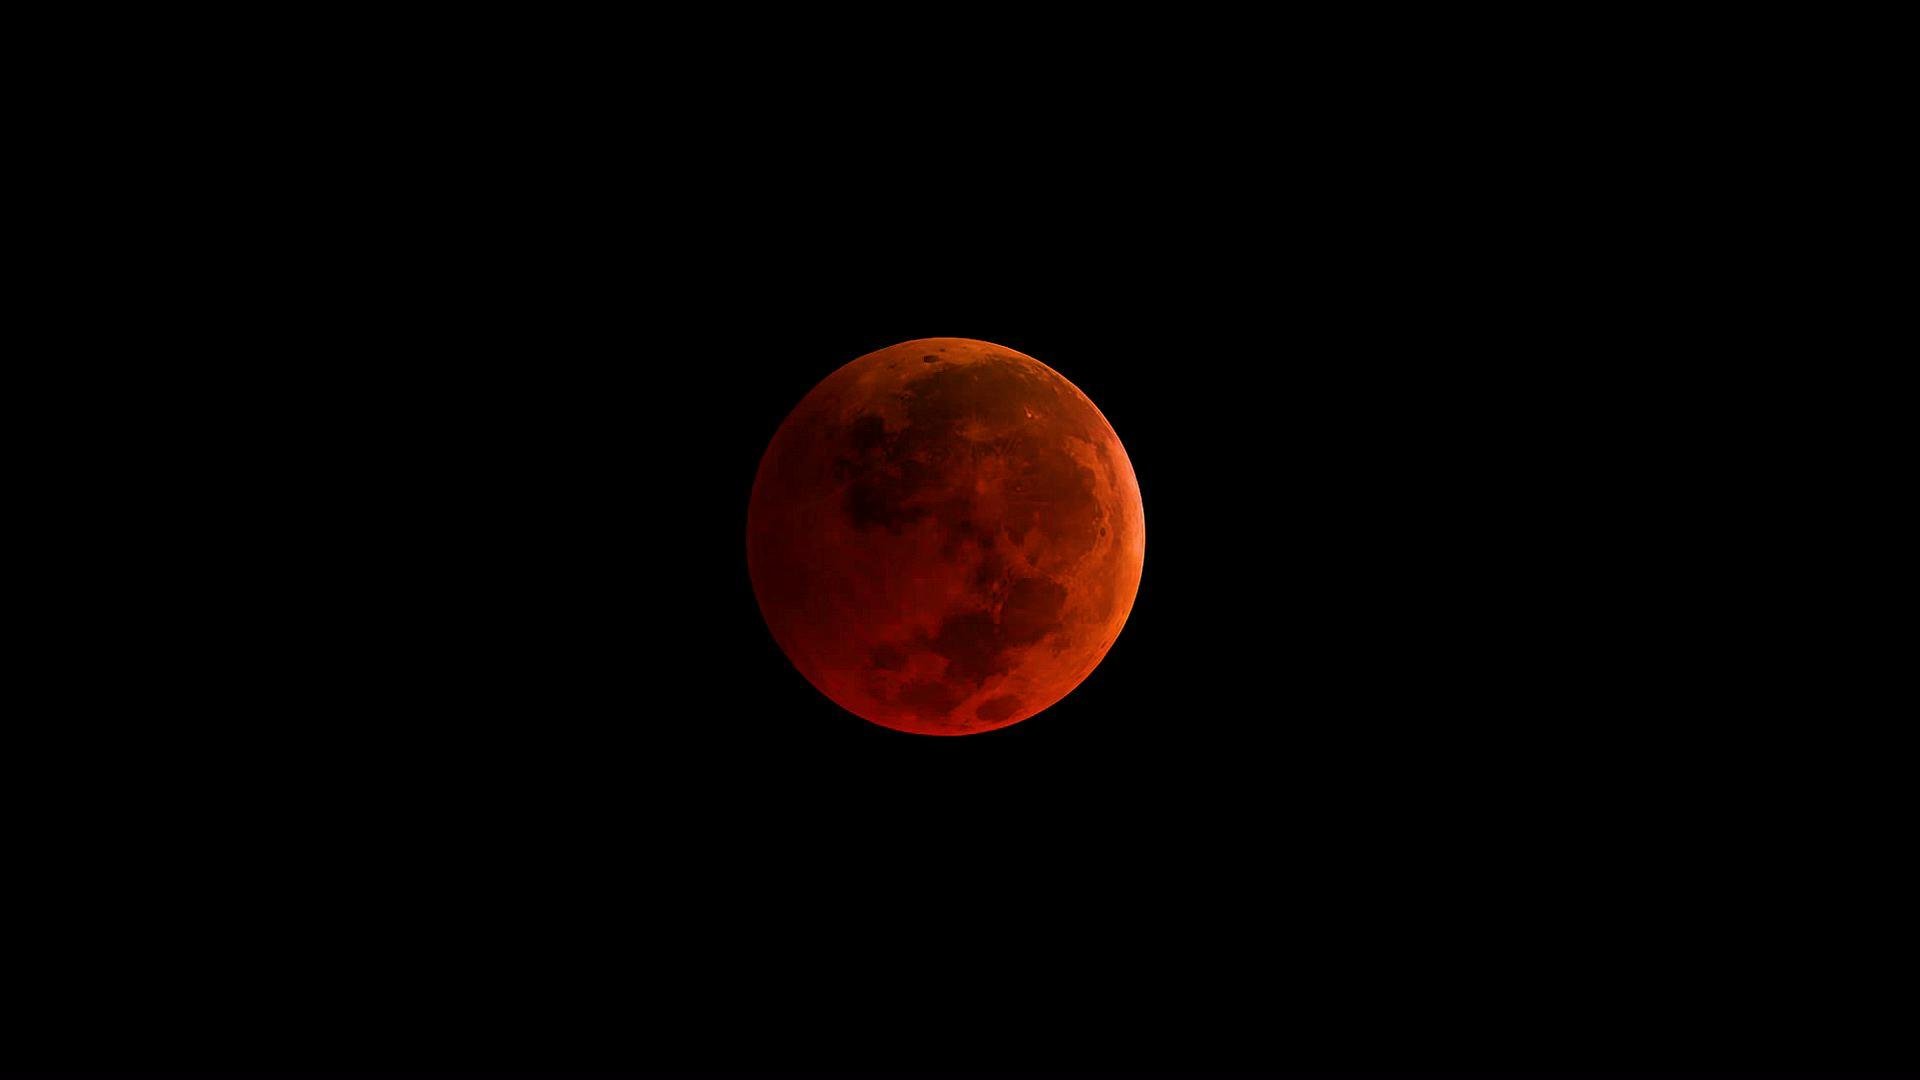 A rare celestial event Jan. 31 will result in a super blue blood moon, when the moon will past through the Earth's shadow and take on a reddish tint. (NASA)